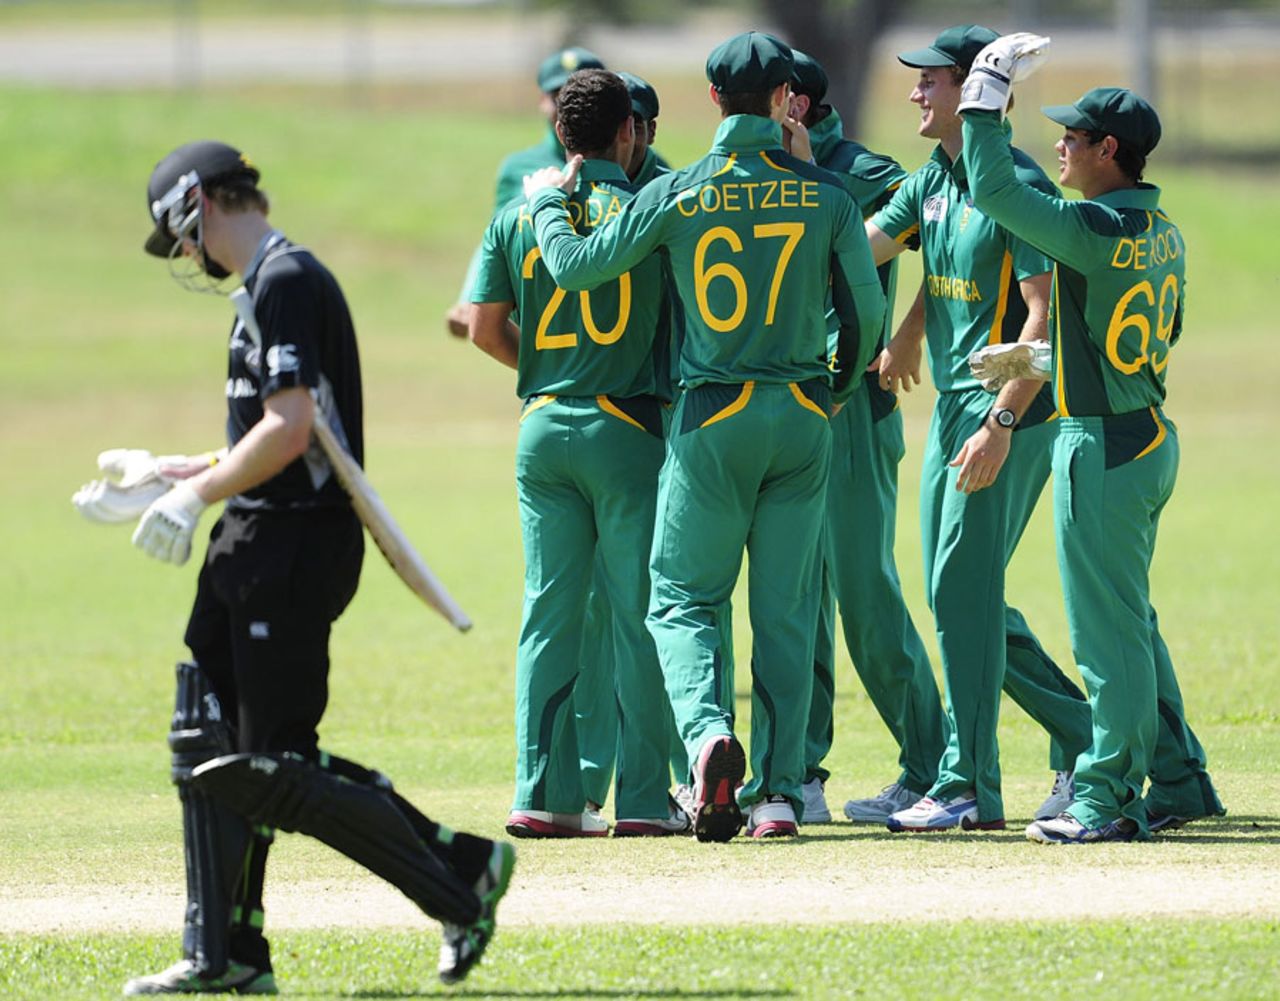 South Africa scythed through New Zealand for 90, New Zealand v South Africa, ICC Under-19 World Cup, 3rd place play-off, Townsville, August 25, 2012